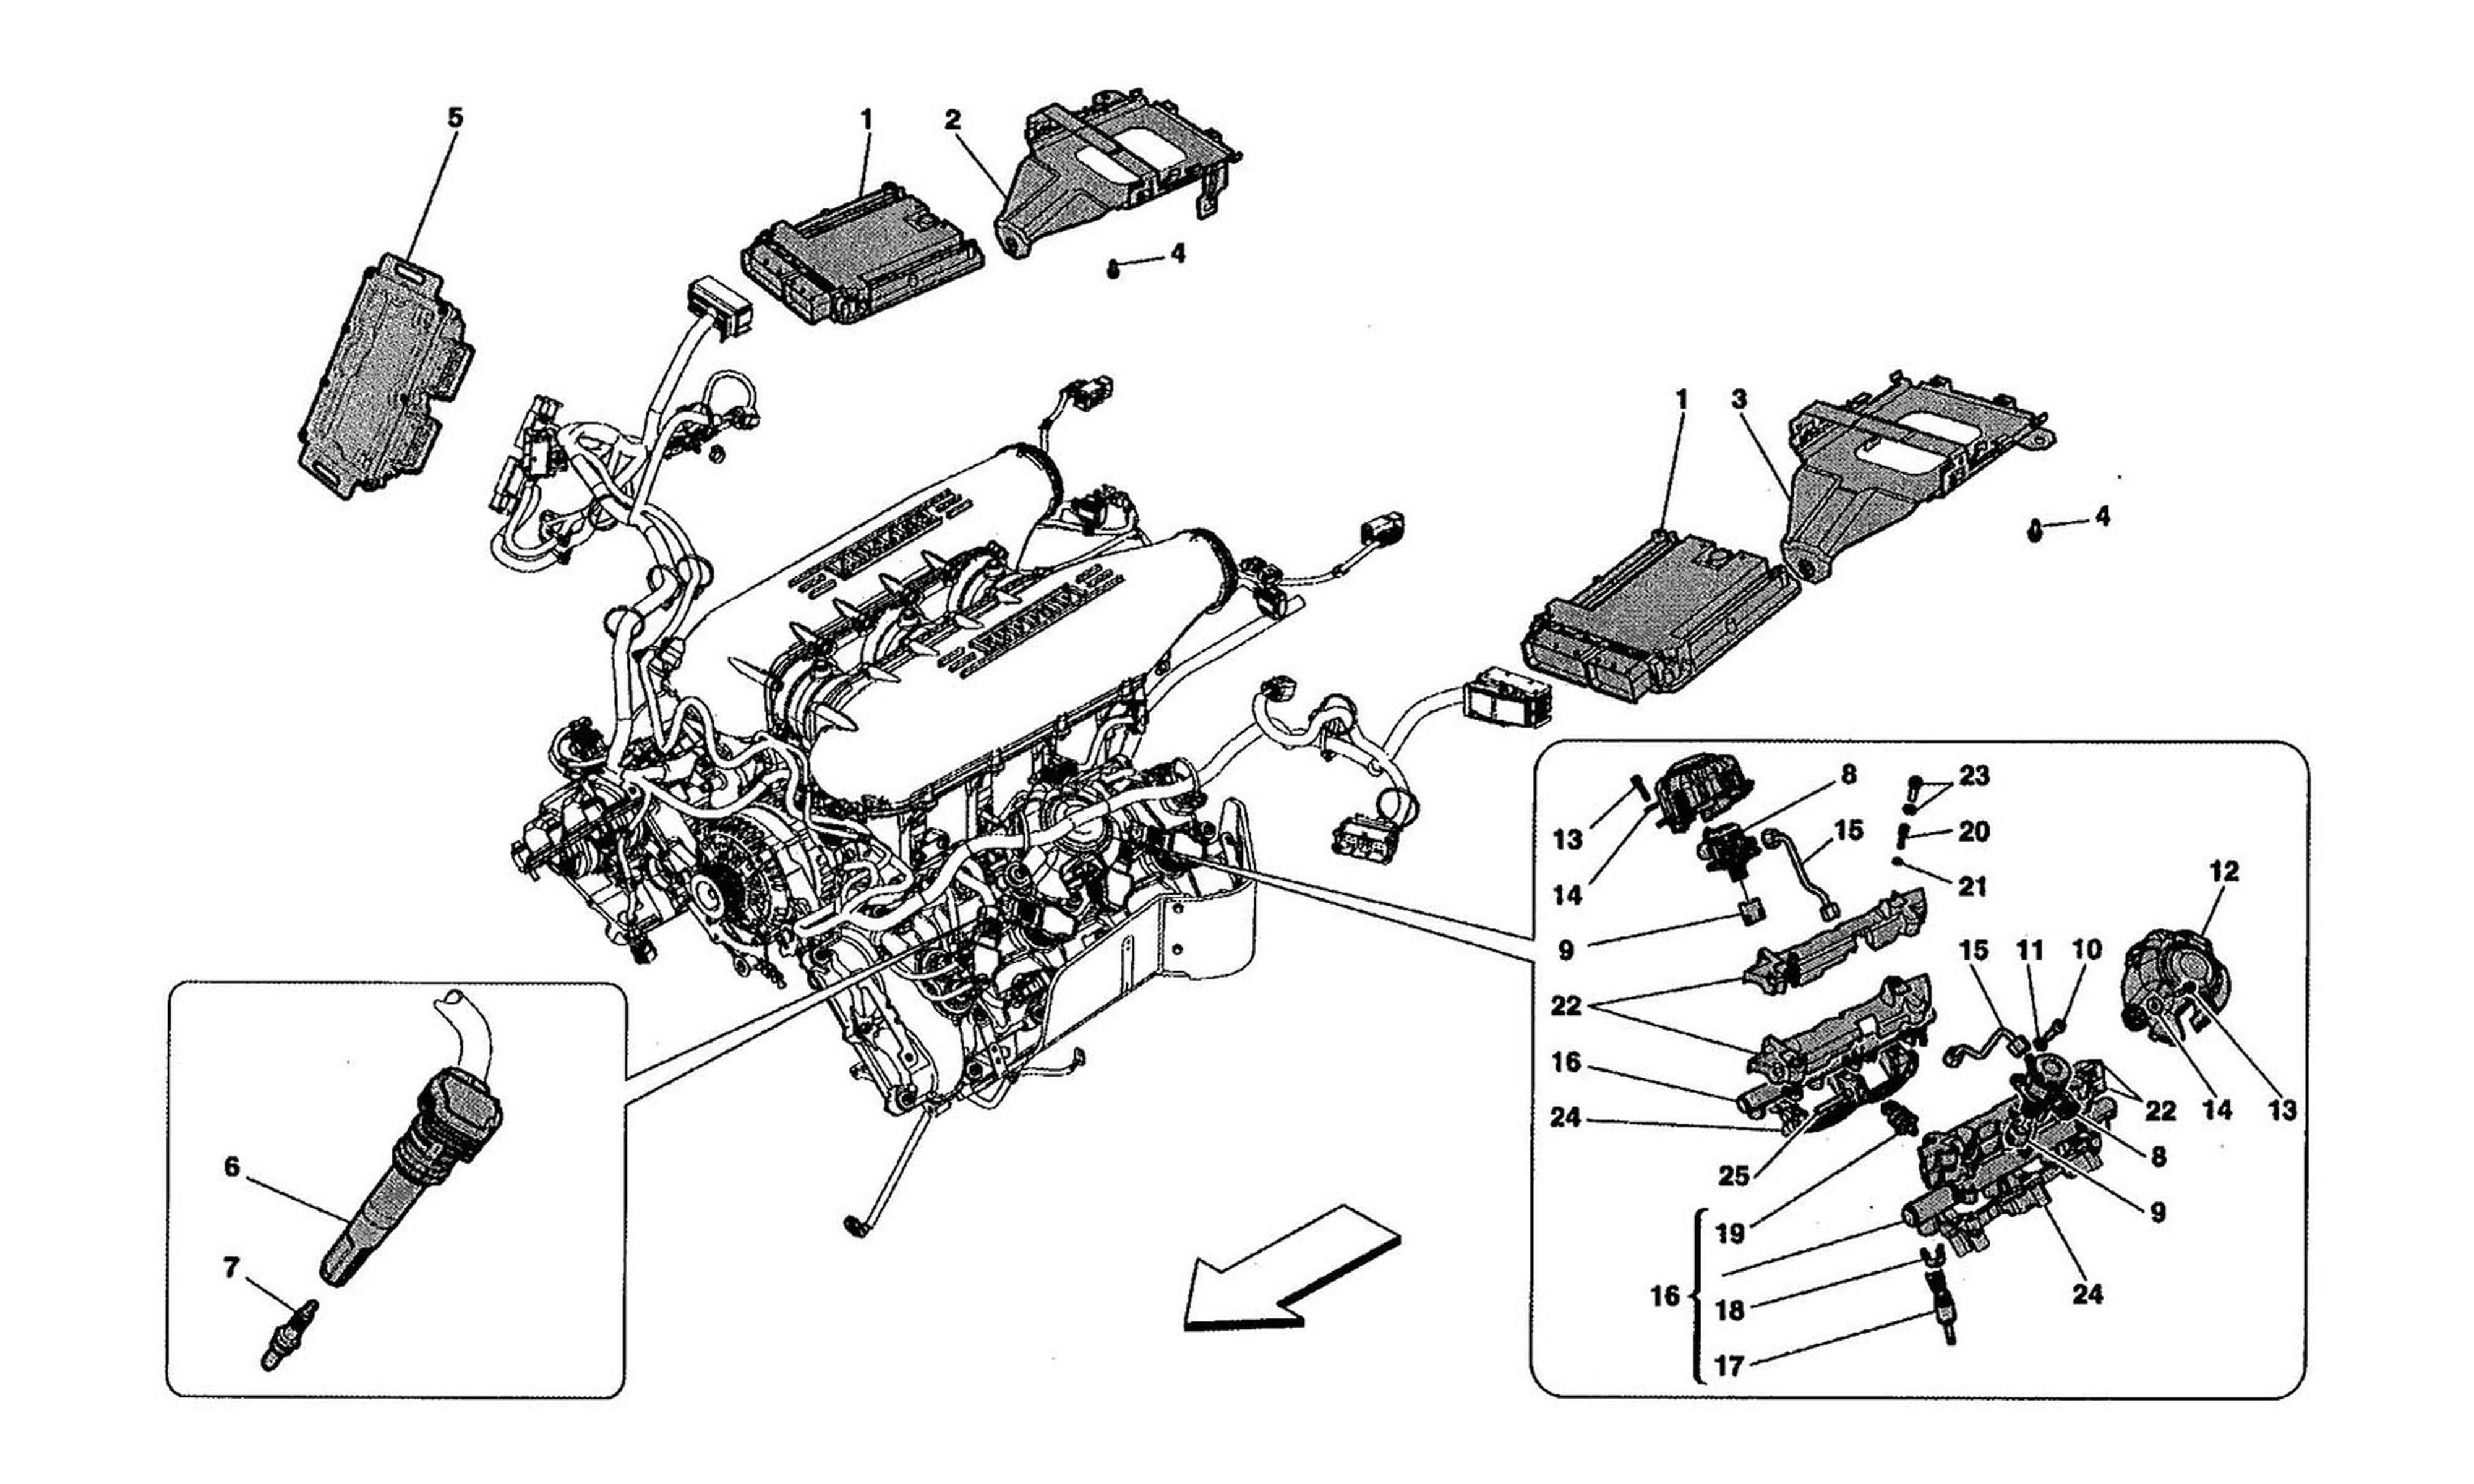 Schematic: Injection - Ignition System